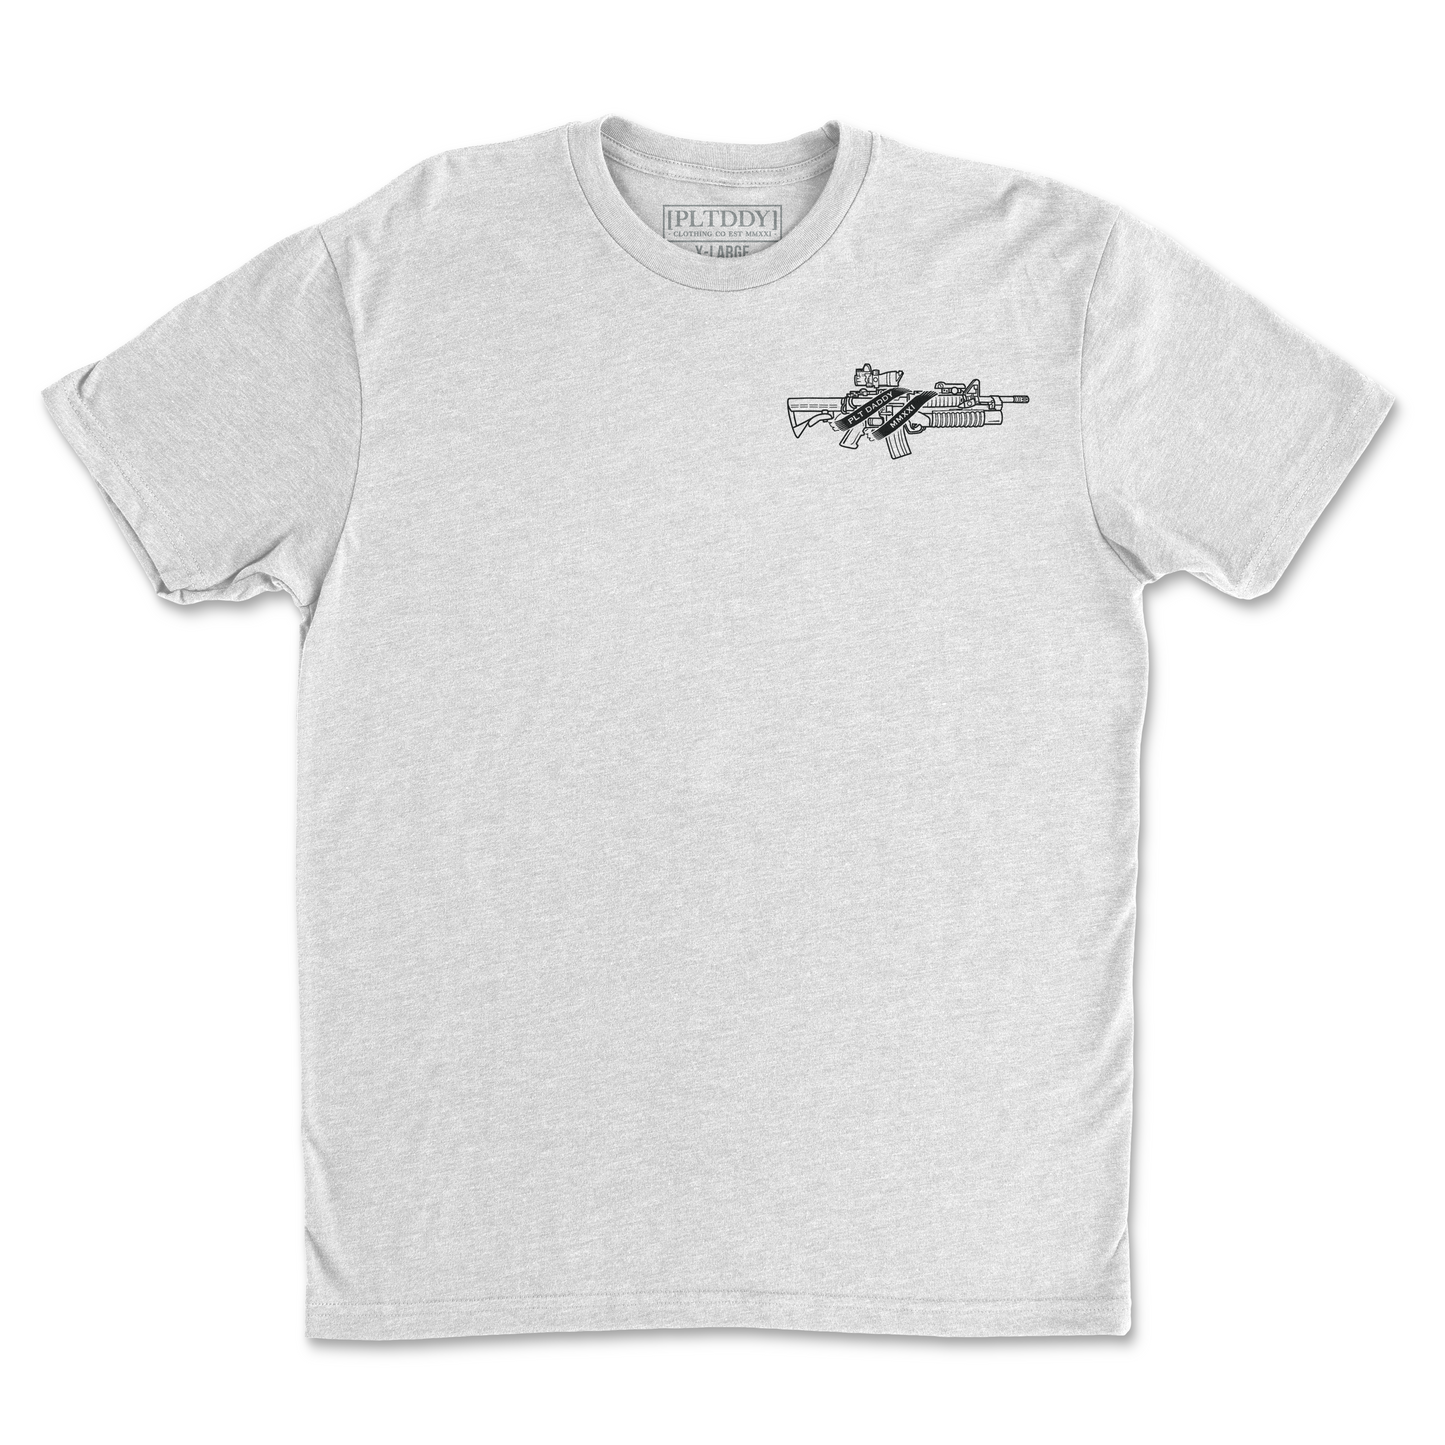 The Paratrooper Tee